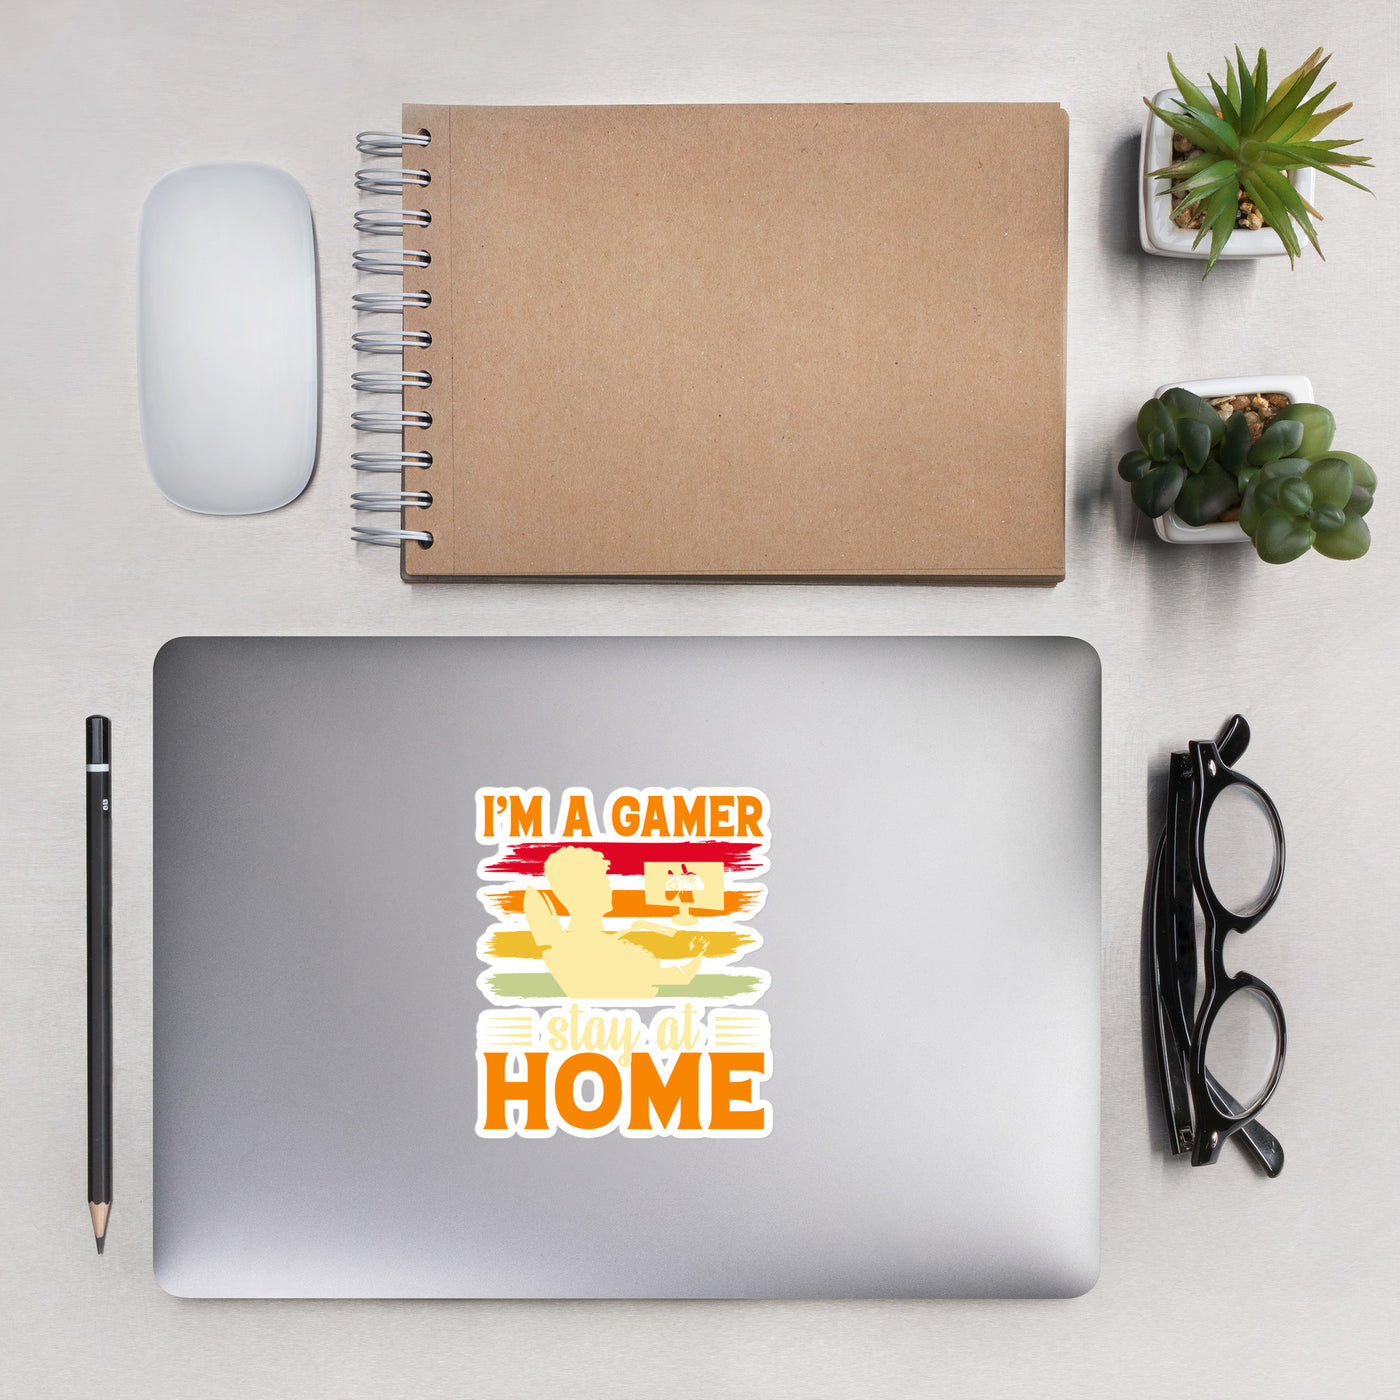 I am a Gamer Stay at Home - Bubble-free stickers